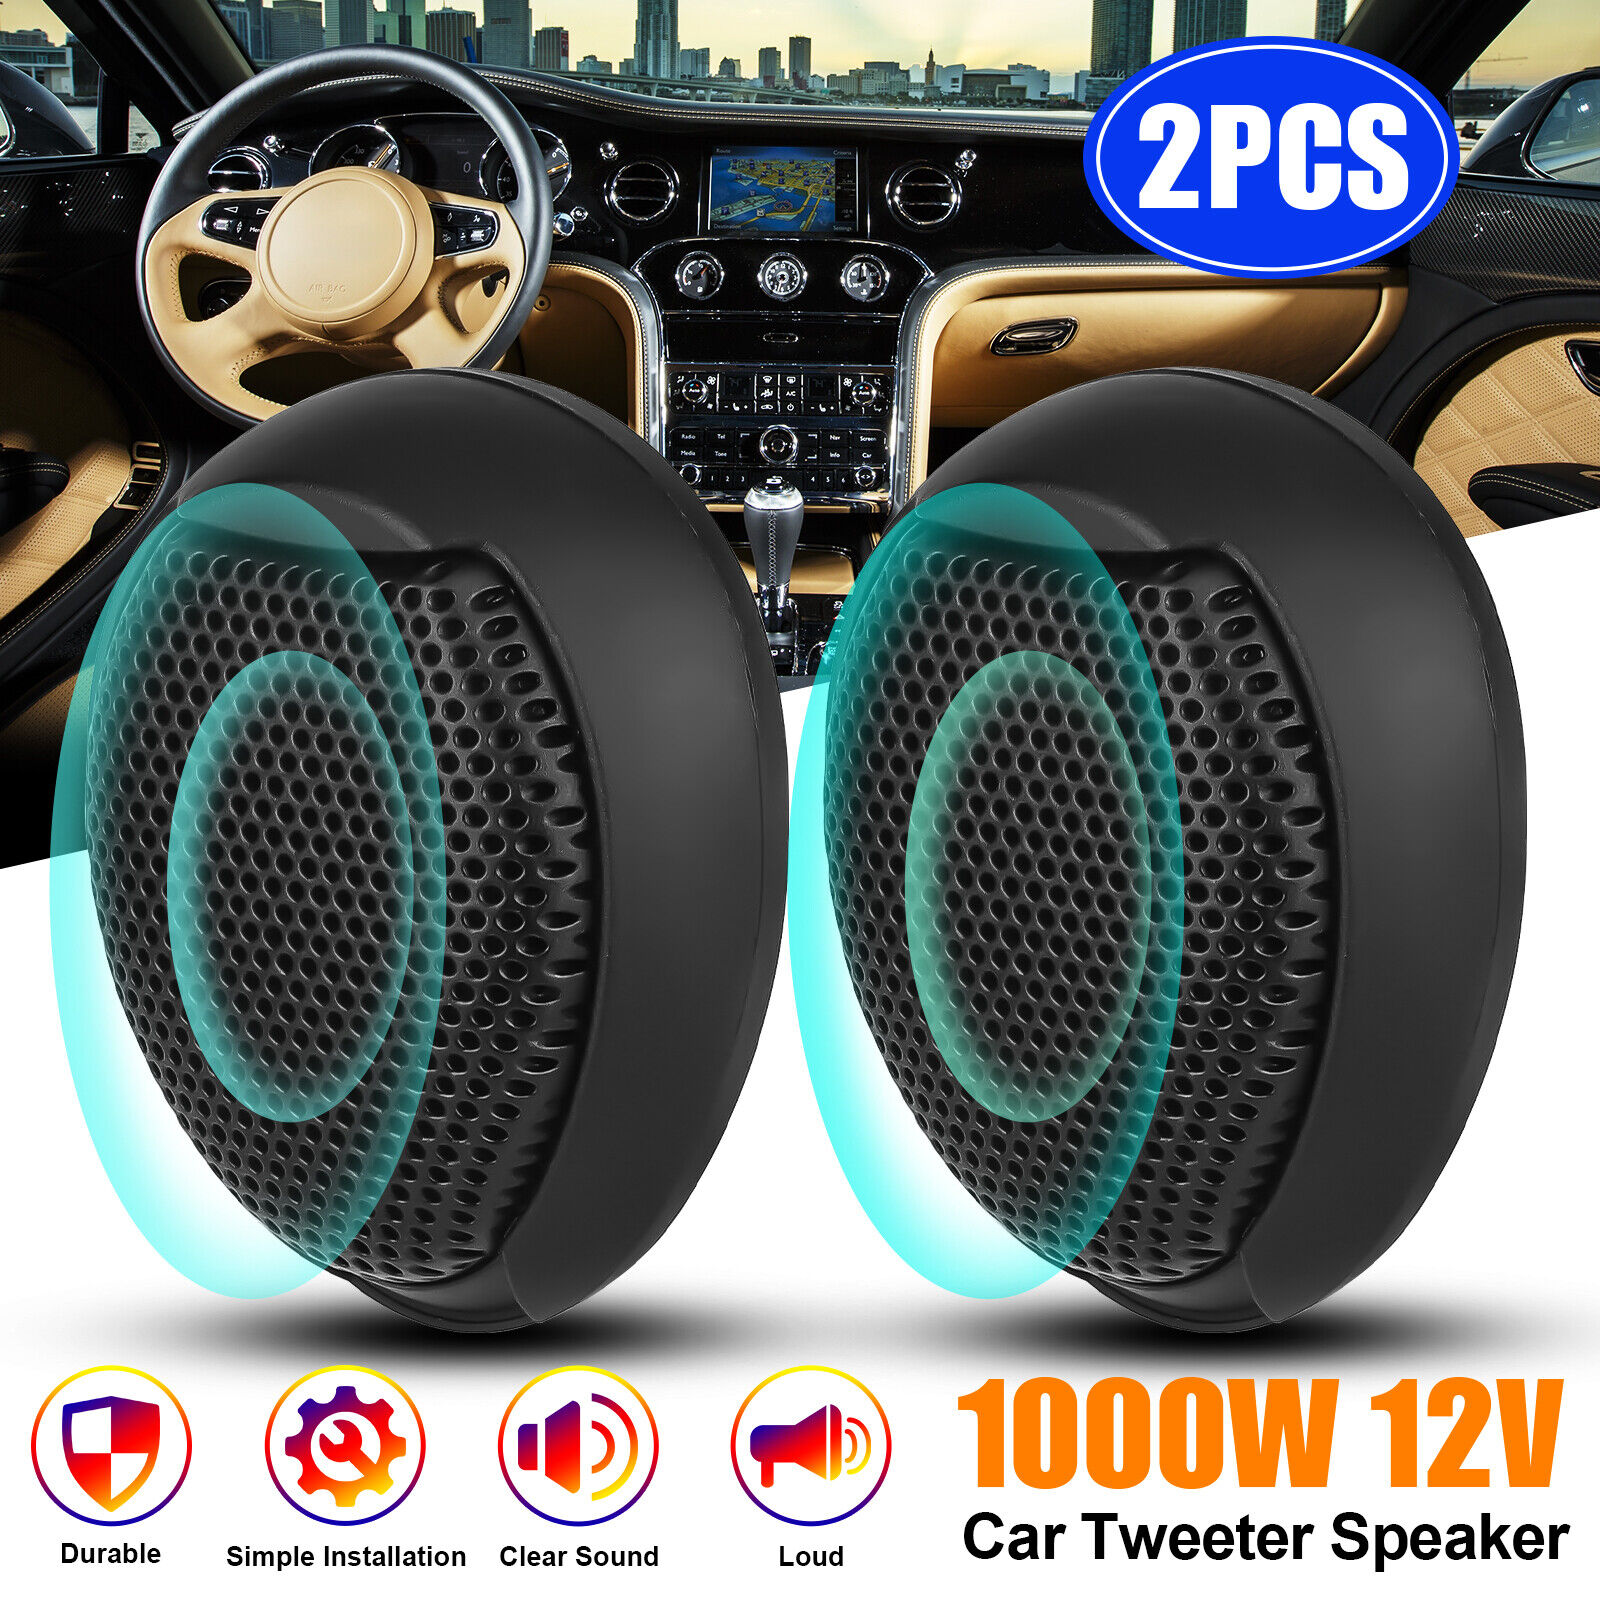 2Pcs Car Dome Tweeters Super Power Speakers Audio High Frequency 1000W Universal